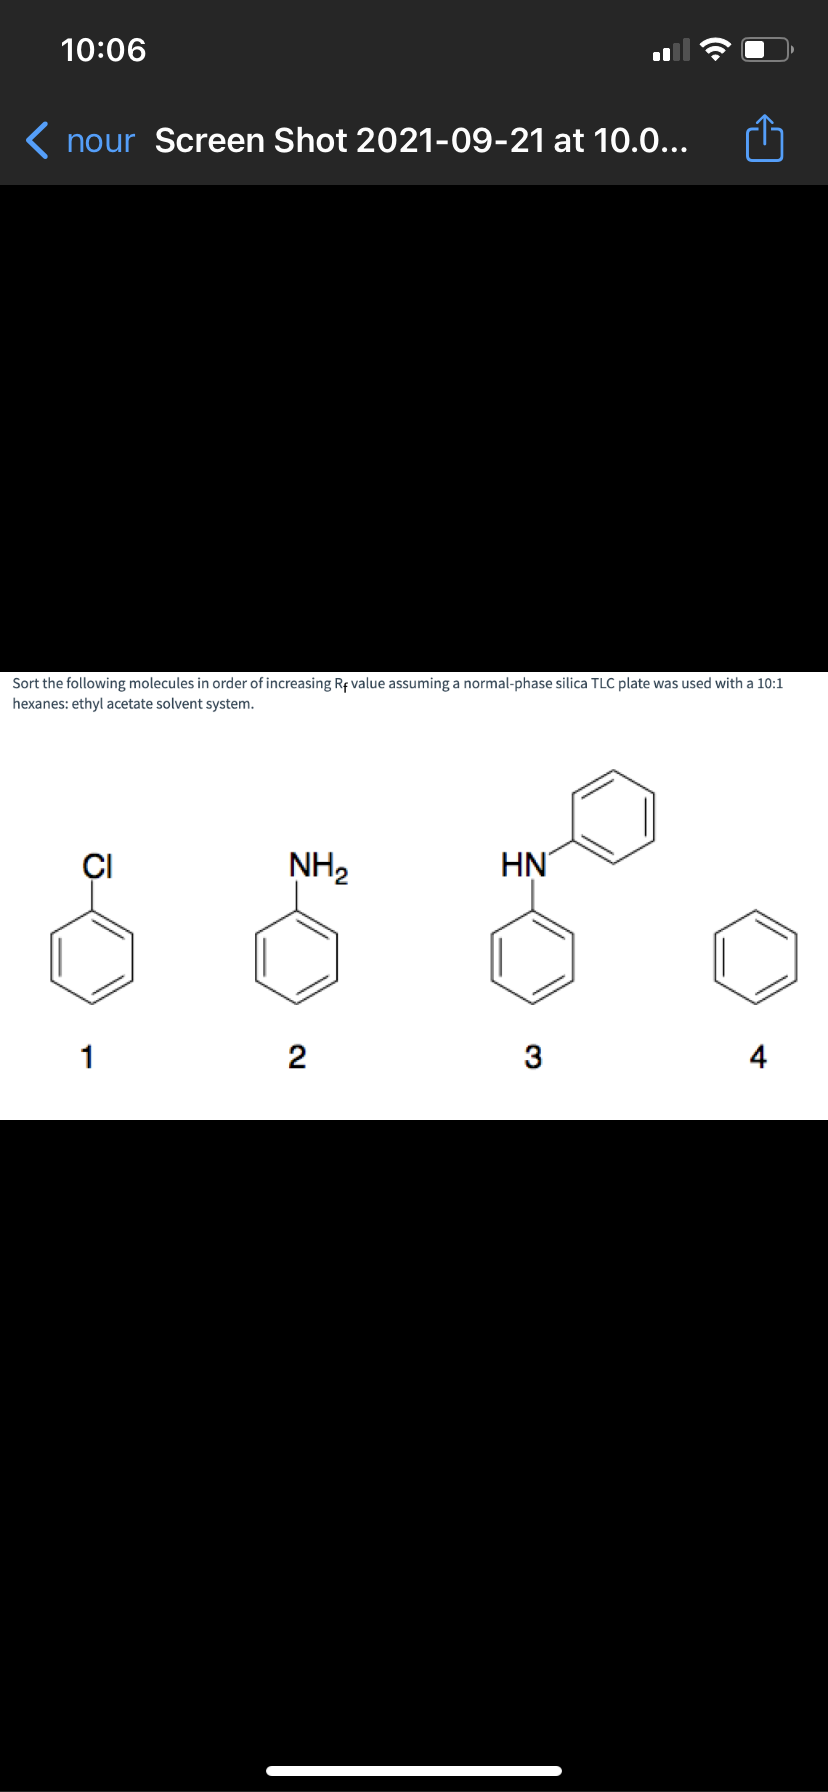 10:06
( nour Screen Shot 2021-09-21 at 10.0..
Sort the following molecules in order of increasing Rf value assuming a normal-phase silica TLC plate was used with a 10:1
hexanes: ethyl acetate solvent system.
NH2
HN
1
2
3
4
